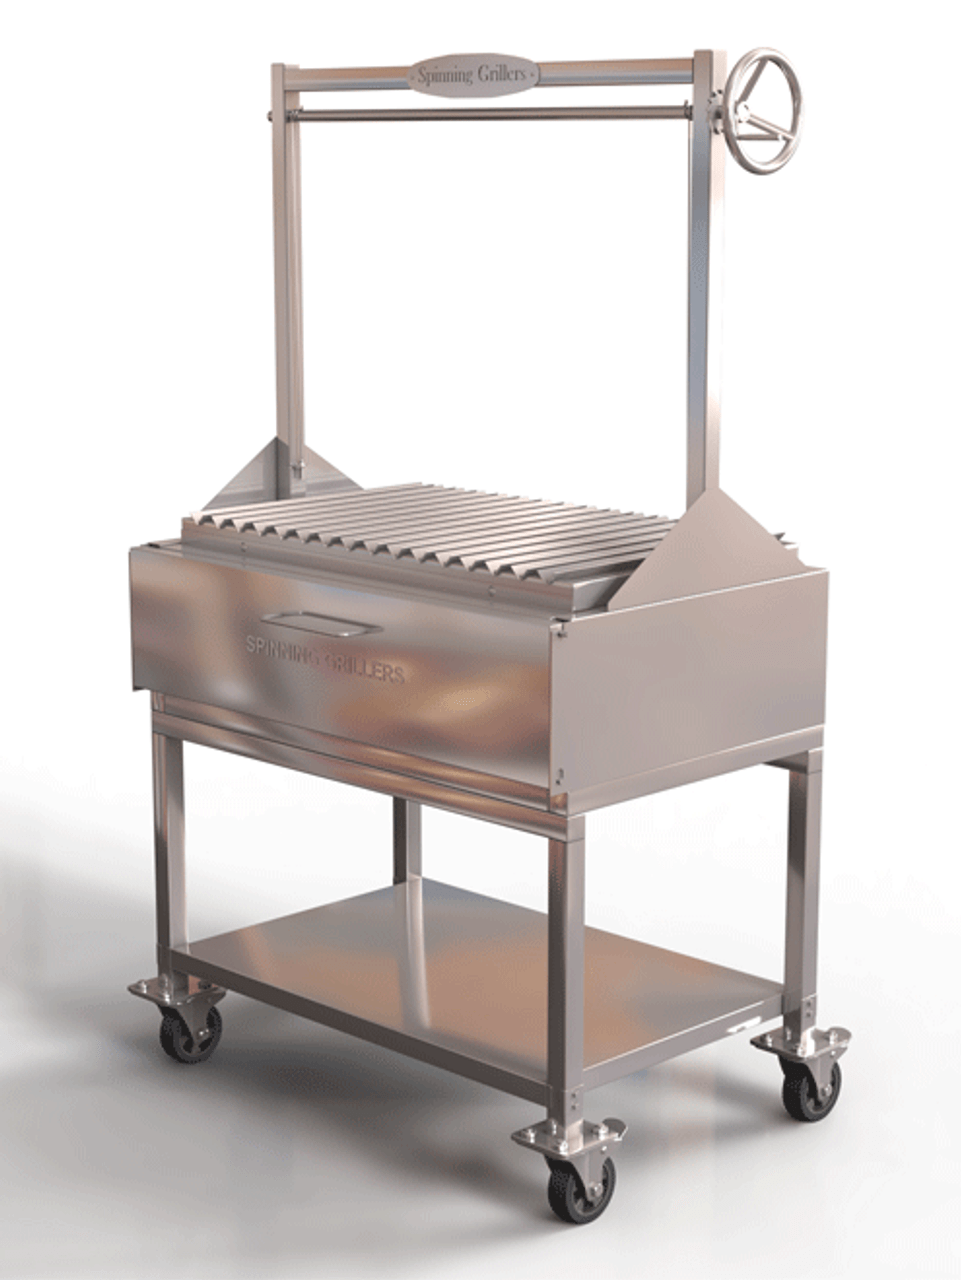 Stainless Steel Small Wood Fired Santa Maria Grill